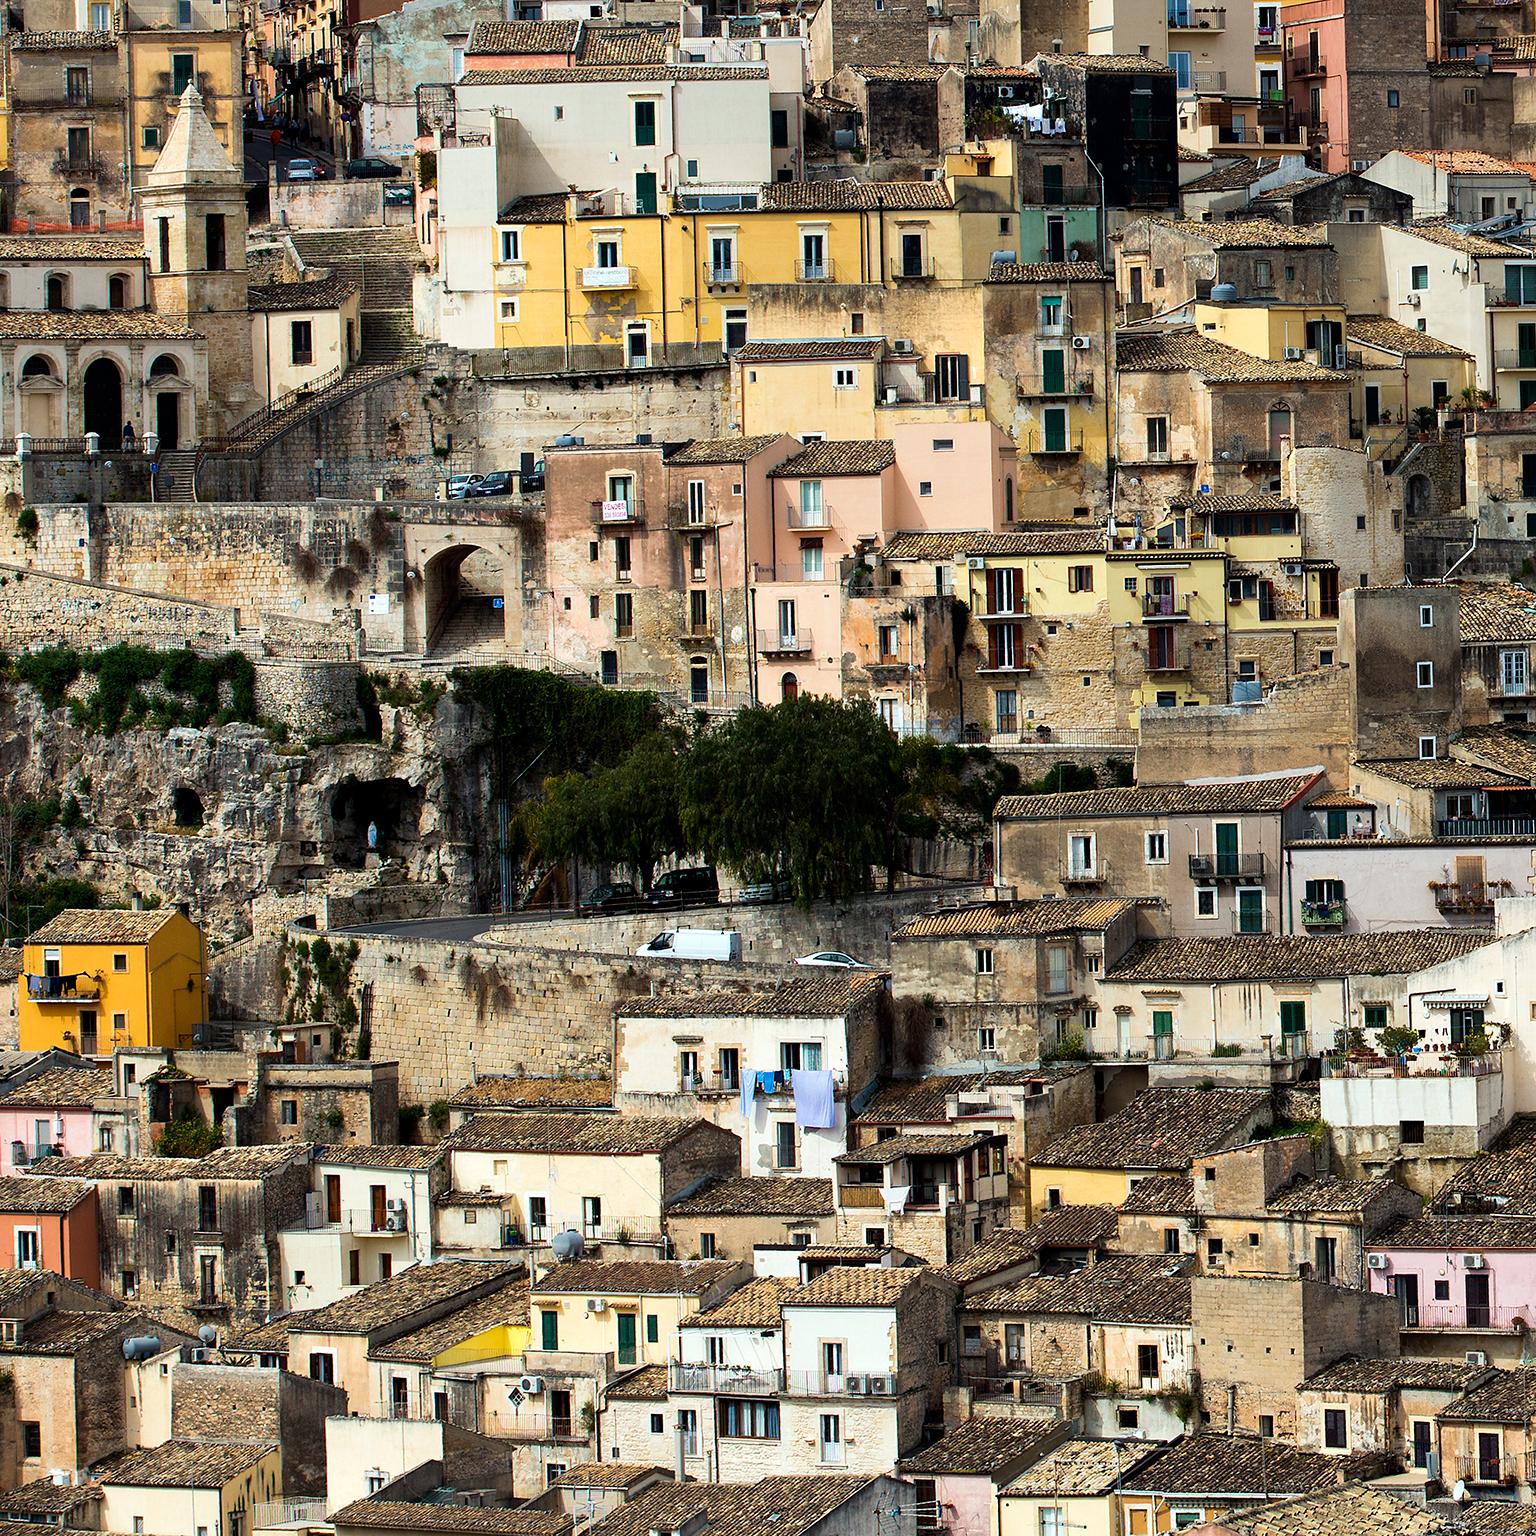 Italy, Sicily, View of the town of Ragusa, 2017

Photograph by Cosmo Condina of Ragusa, one of the most picturesque charming historic hilltop town in Sicily. One of the UNESCO-listed Baroque towns of south-east Sicily.

Archival Pigment Print, 19” X